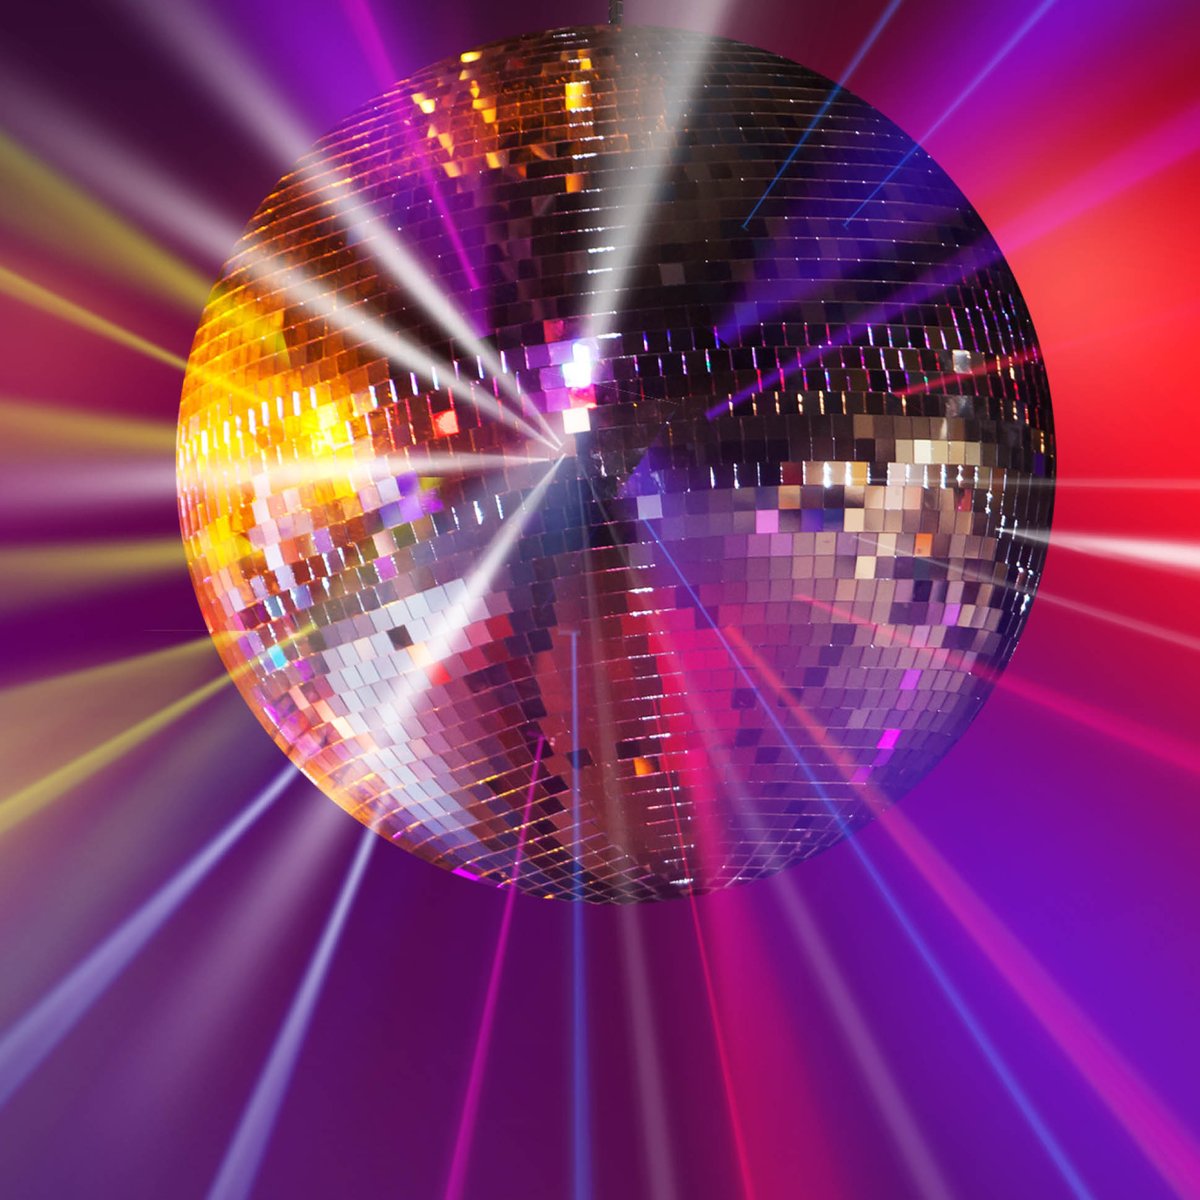 CARWASH DISCO, Friday 2nd June | From 7pm. Join us to boogie the night away with the most iconic 70's disco classics and feast on a delicious two-course supper🕺 >> click the link for more and to book orlo.uk/5v1Gx